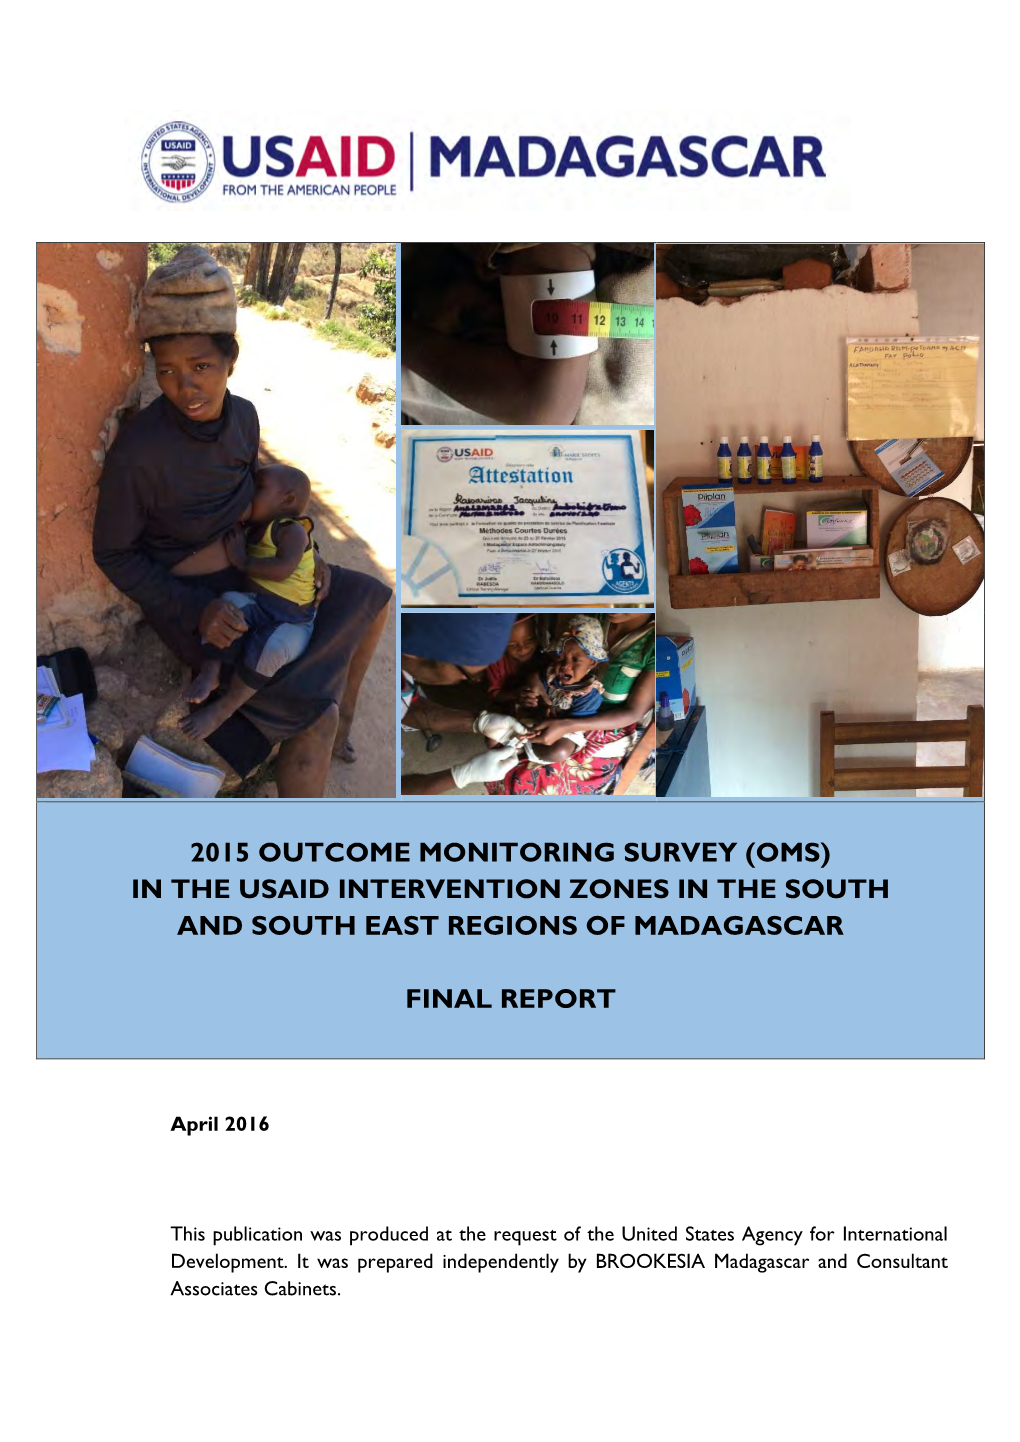 2015 Outcome Monitoring Survey (Oms) in the Usaid Intervention Zones in the South and South East Regions of Madagascar